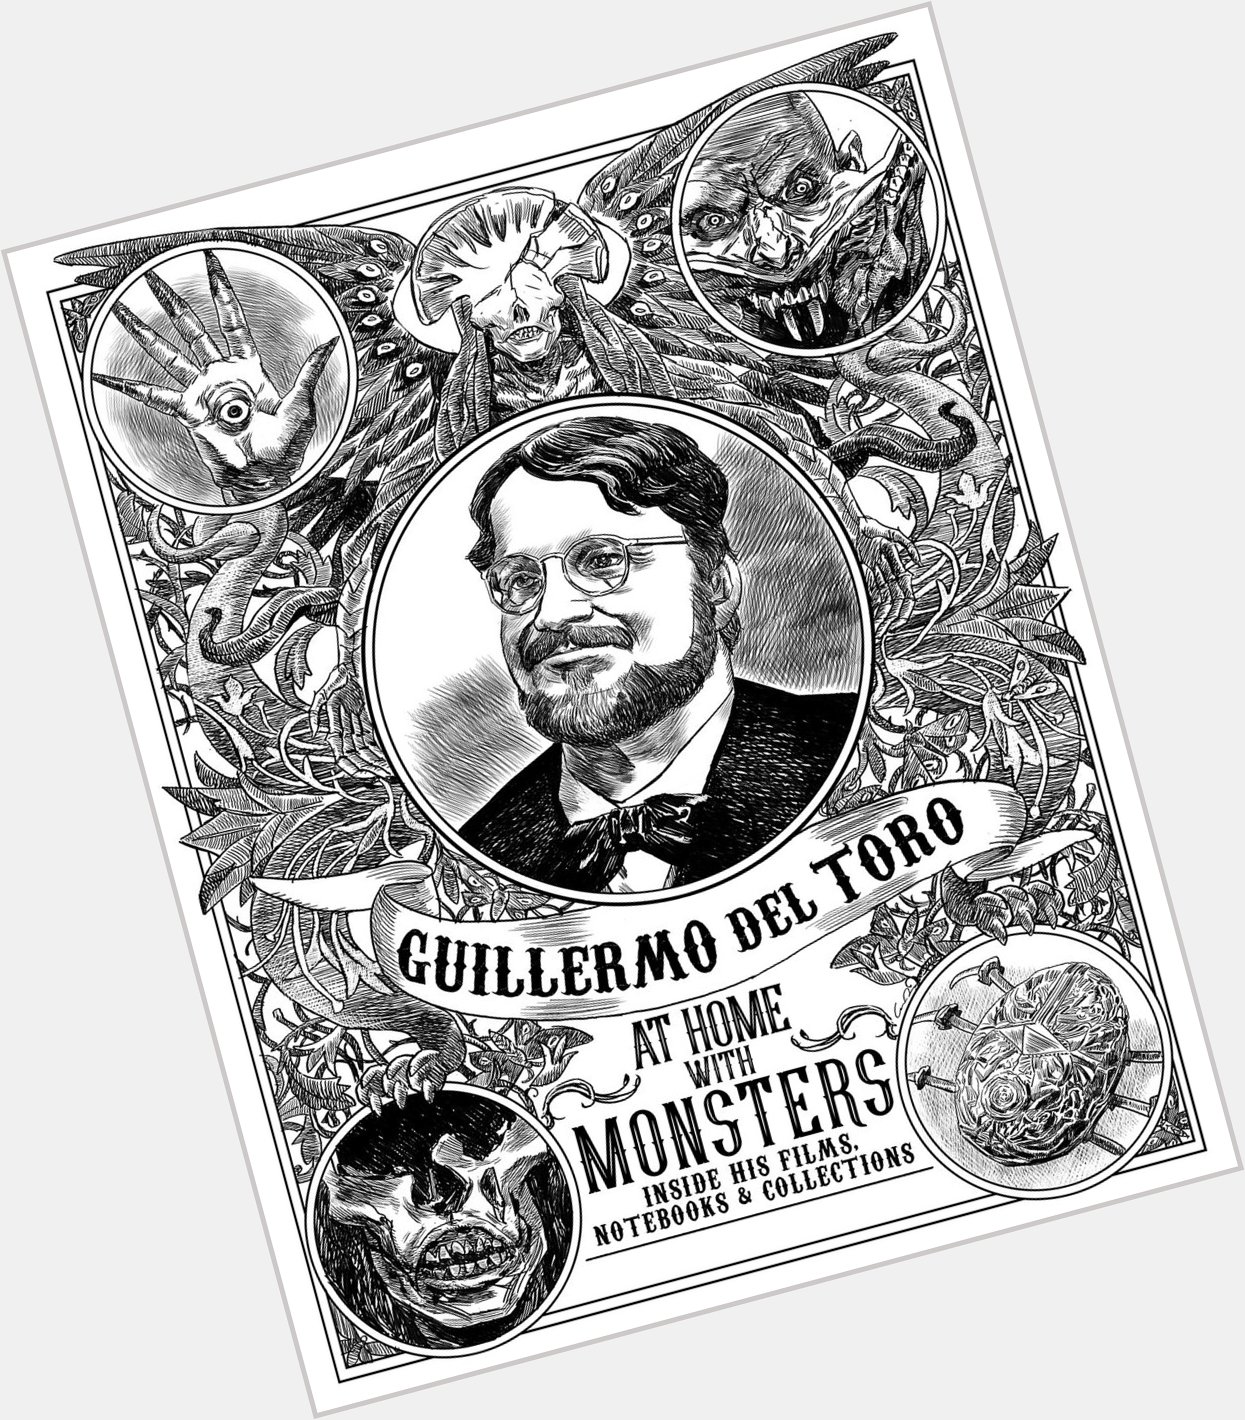 Happy 53rd Birthday to Guillermo del Toro!! ~ monstrous cheers to many more adventures ahead! 